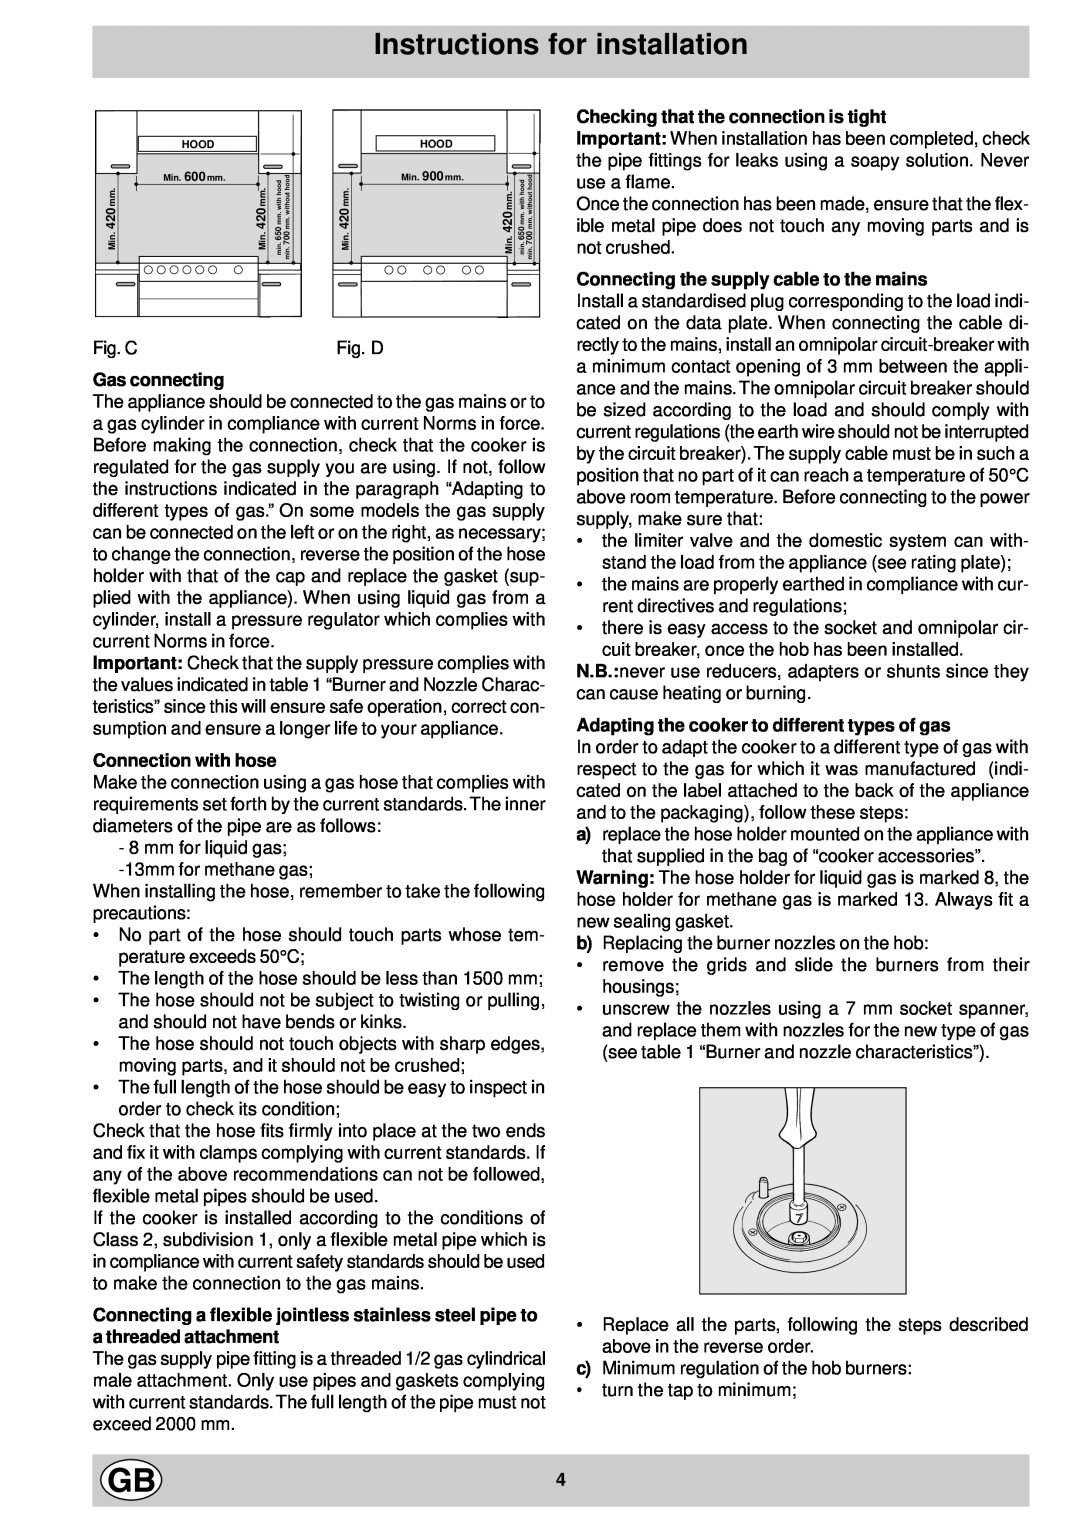 Hotpoint EG600P Instructions for installation, Gas connecting, Connection with hose, Checking that the connection is tight 